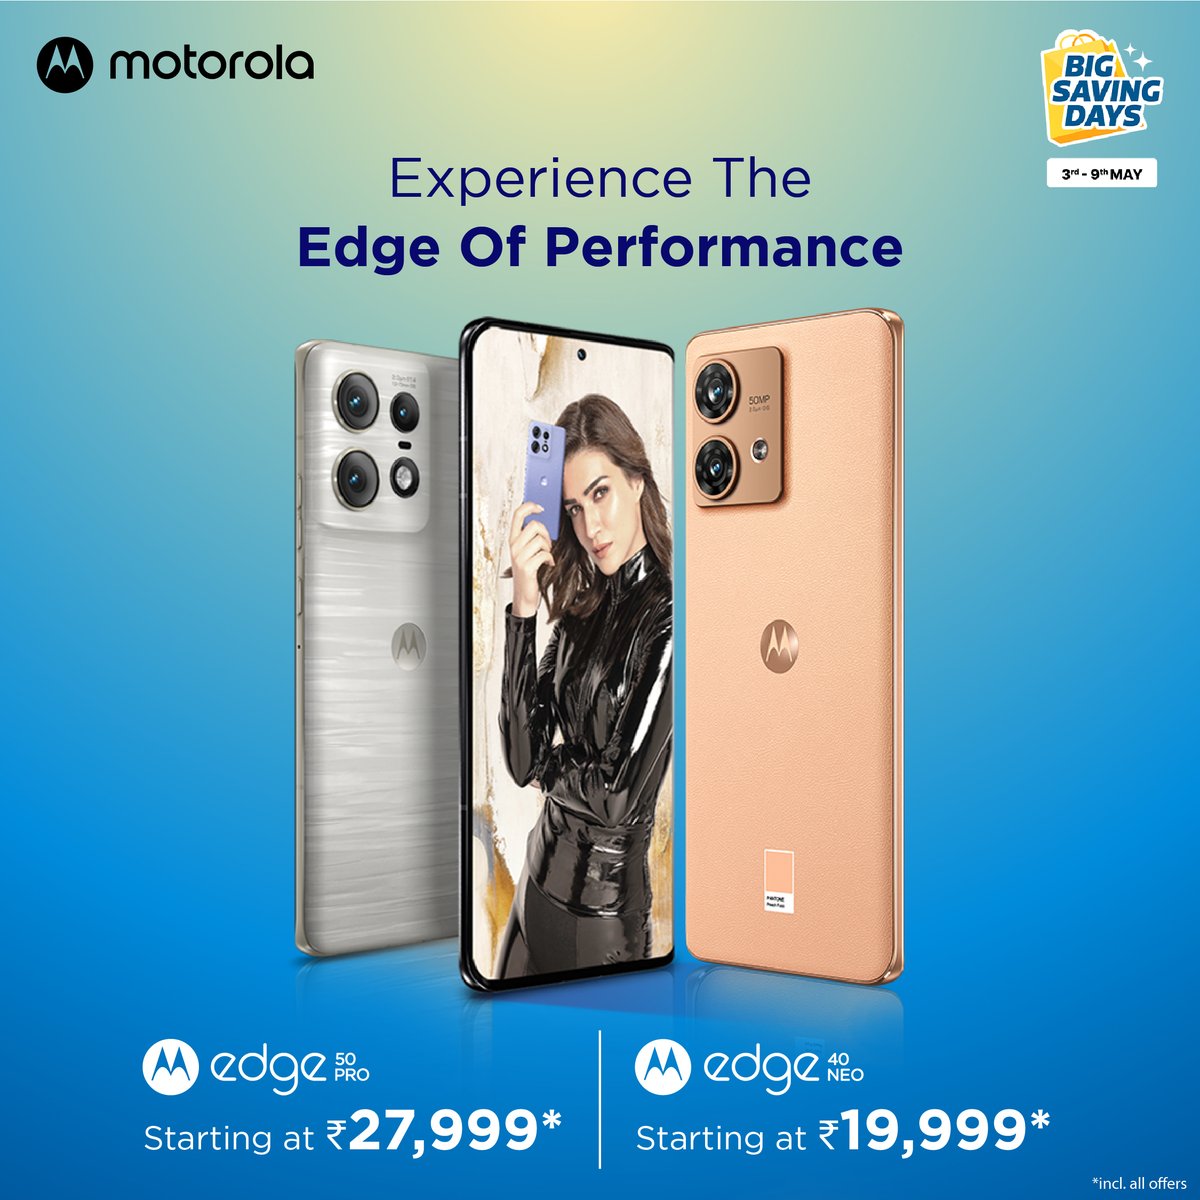 Big Saving Days Are Live! Experience a phone that pushes boundaries. Get #MotorolaEdge40Neo starting at ₹19,999* and #MotorolaEdge50Pro starting at ₹27,999* only @flipkart. Don't settle for anything less than the best.